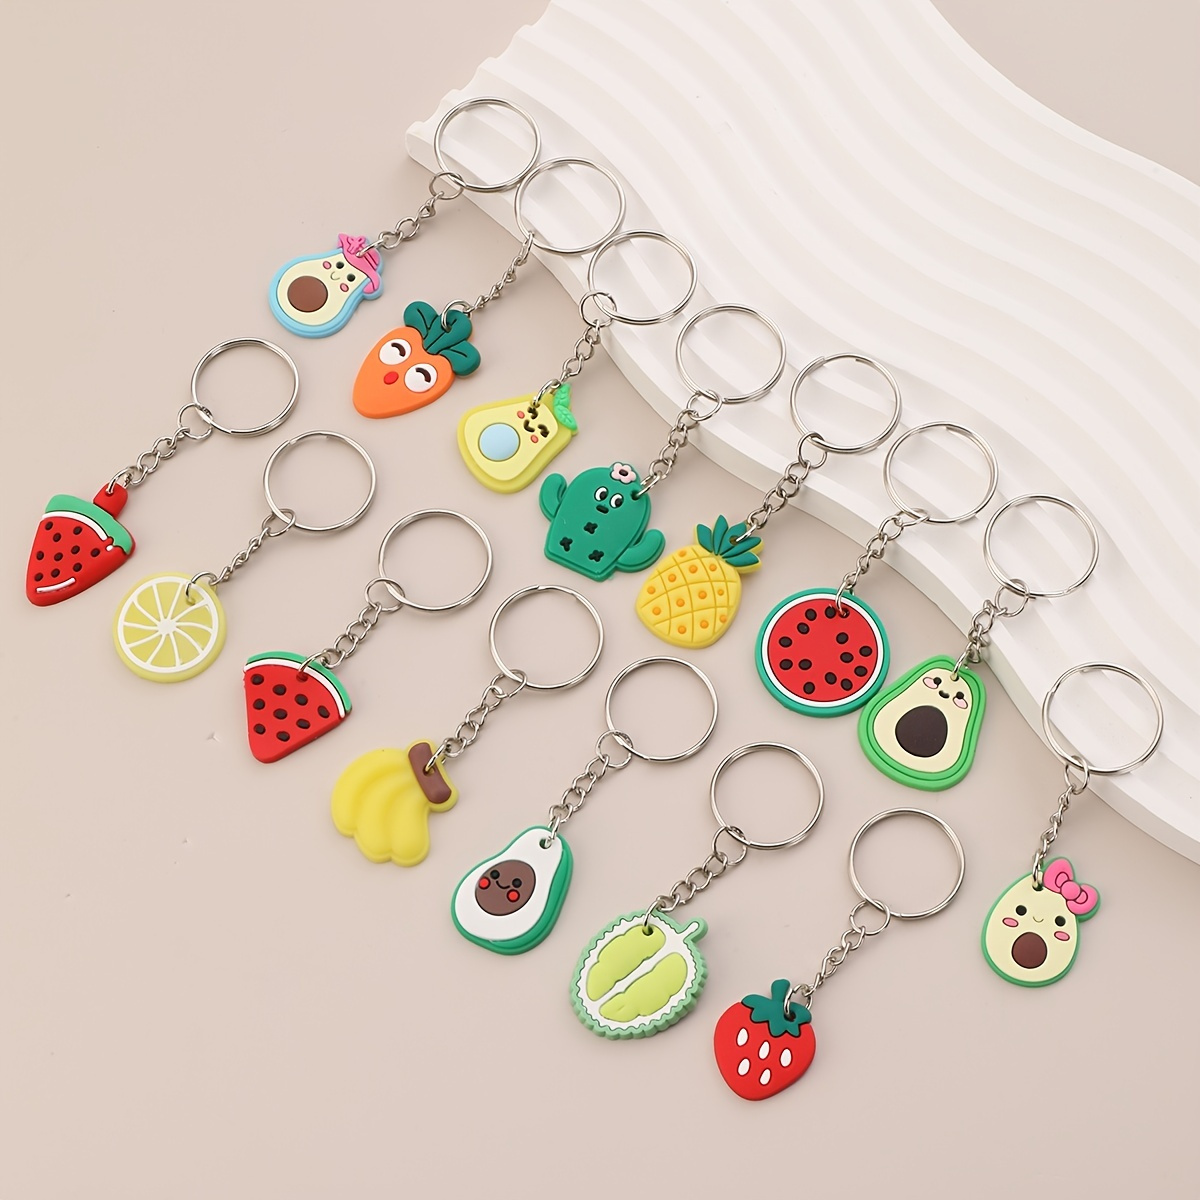 

16pcs Cute Summer Fruits Watermelon Keychain Party Favors Goodie Bags Gifts For Summer Birthday Party Keyring